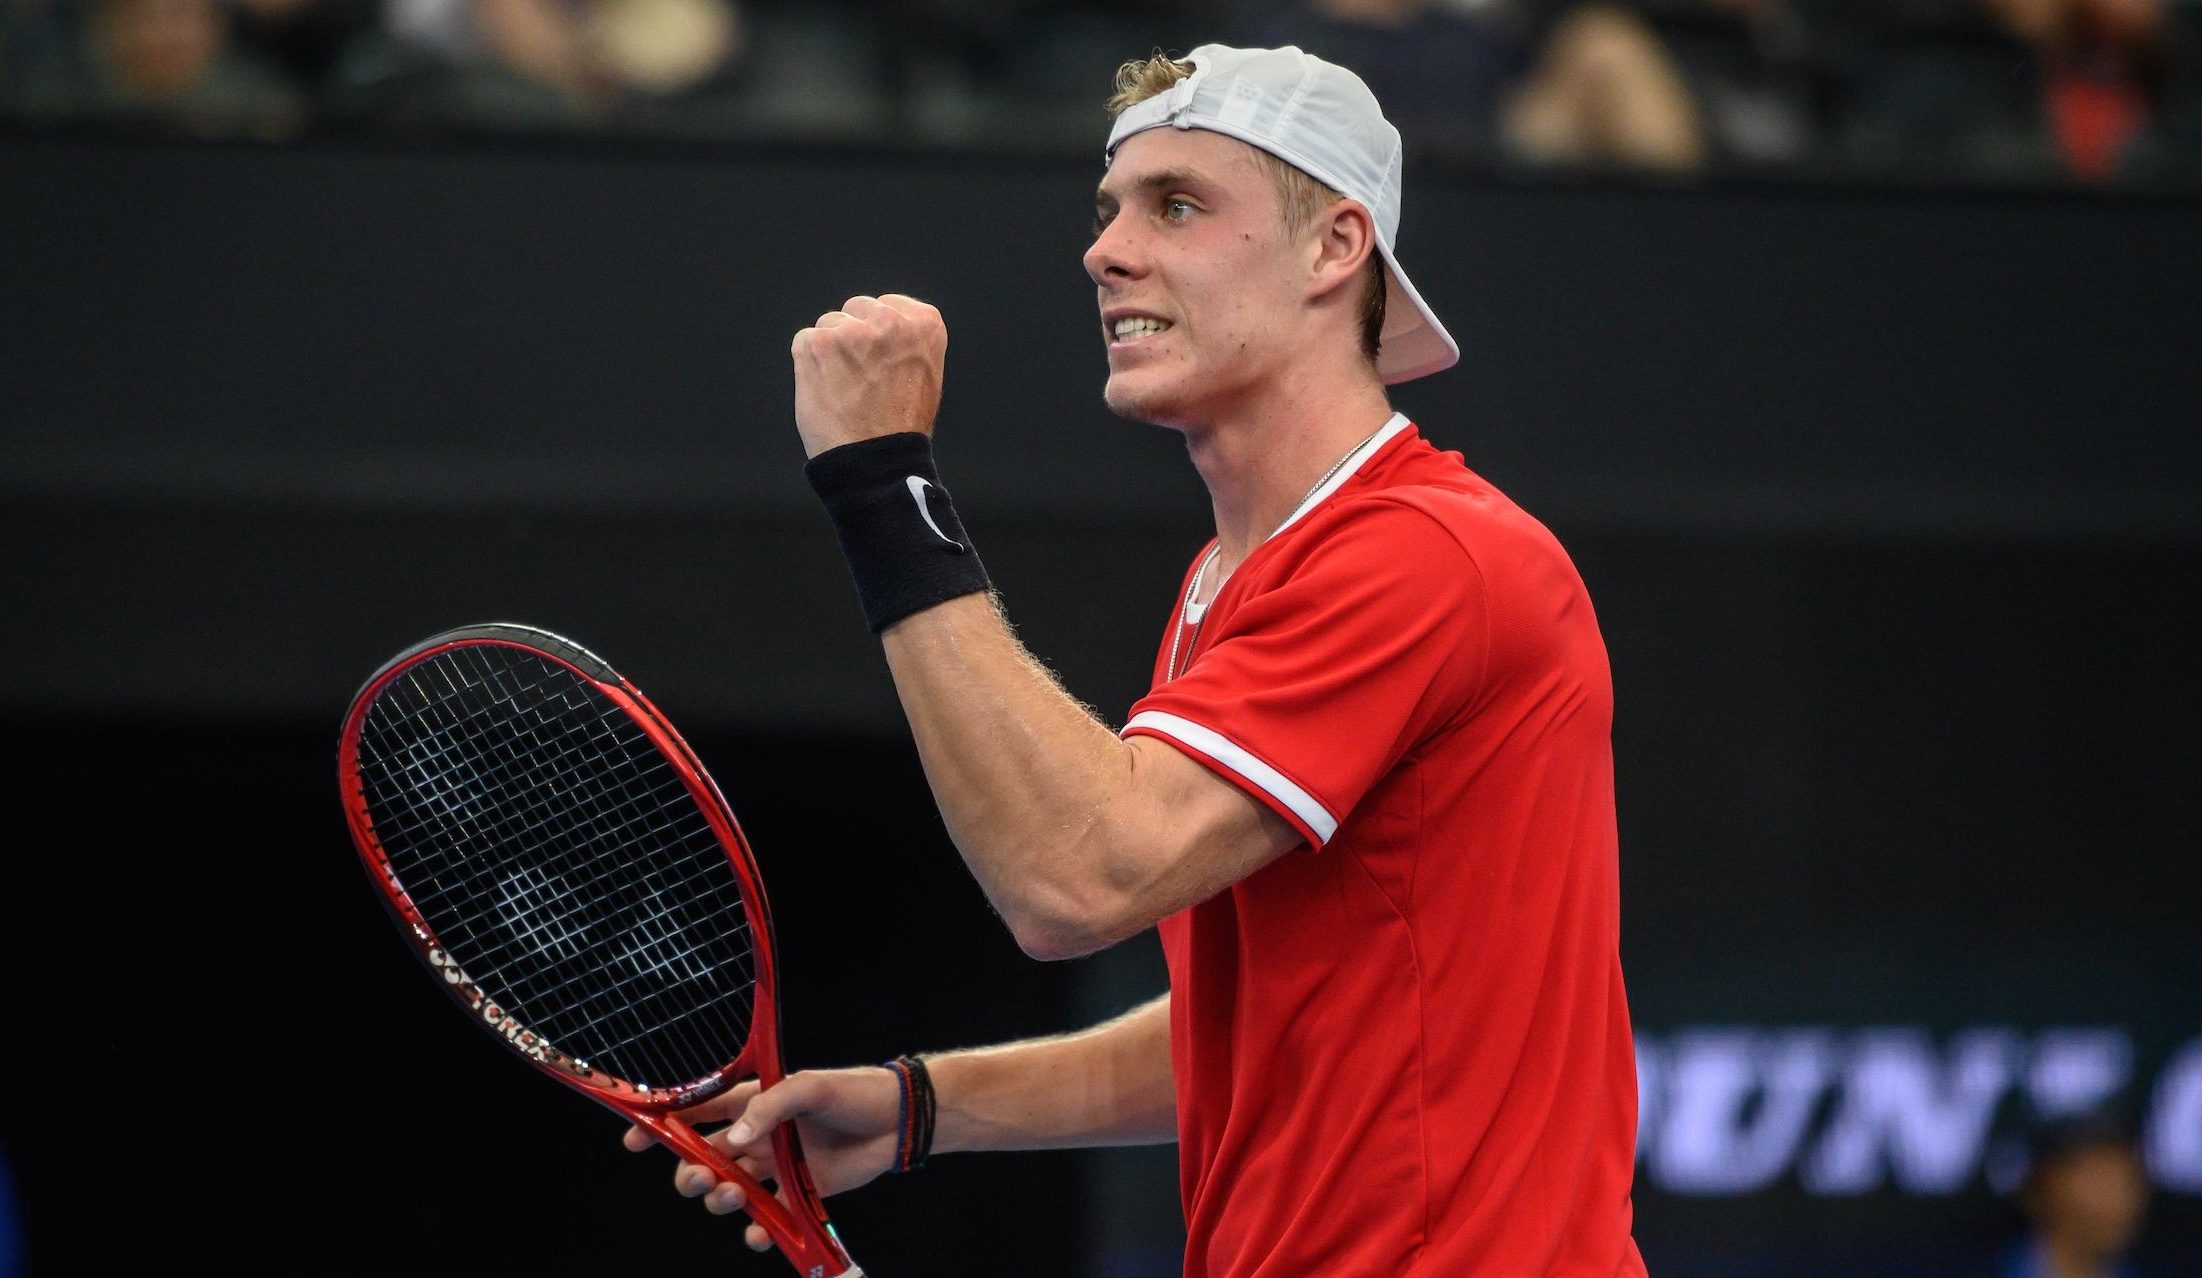 3 Canadians among top seeds in the men's draw the Open - Tennis Canada